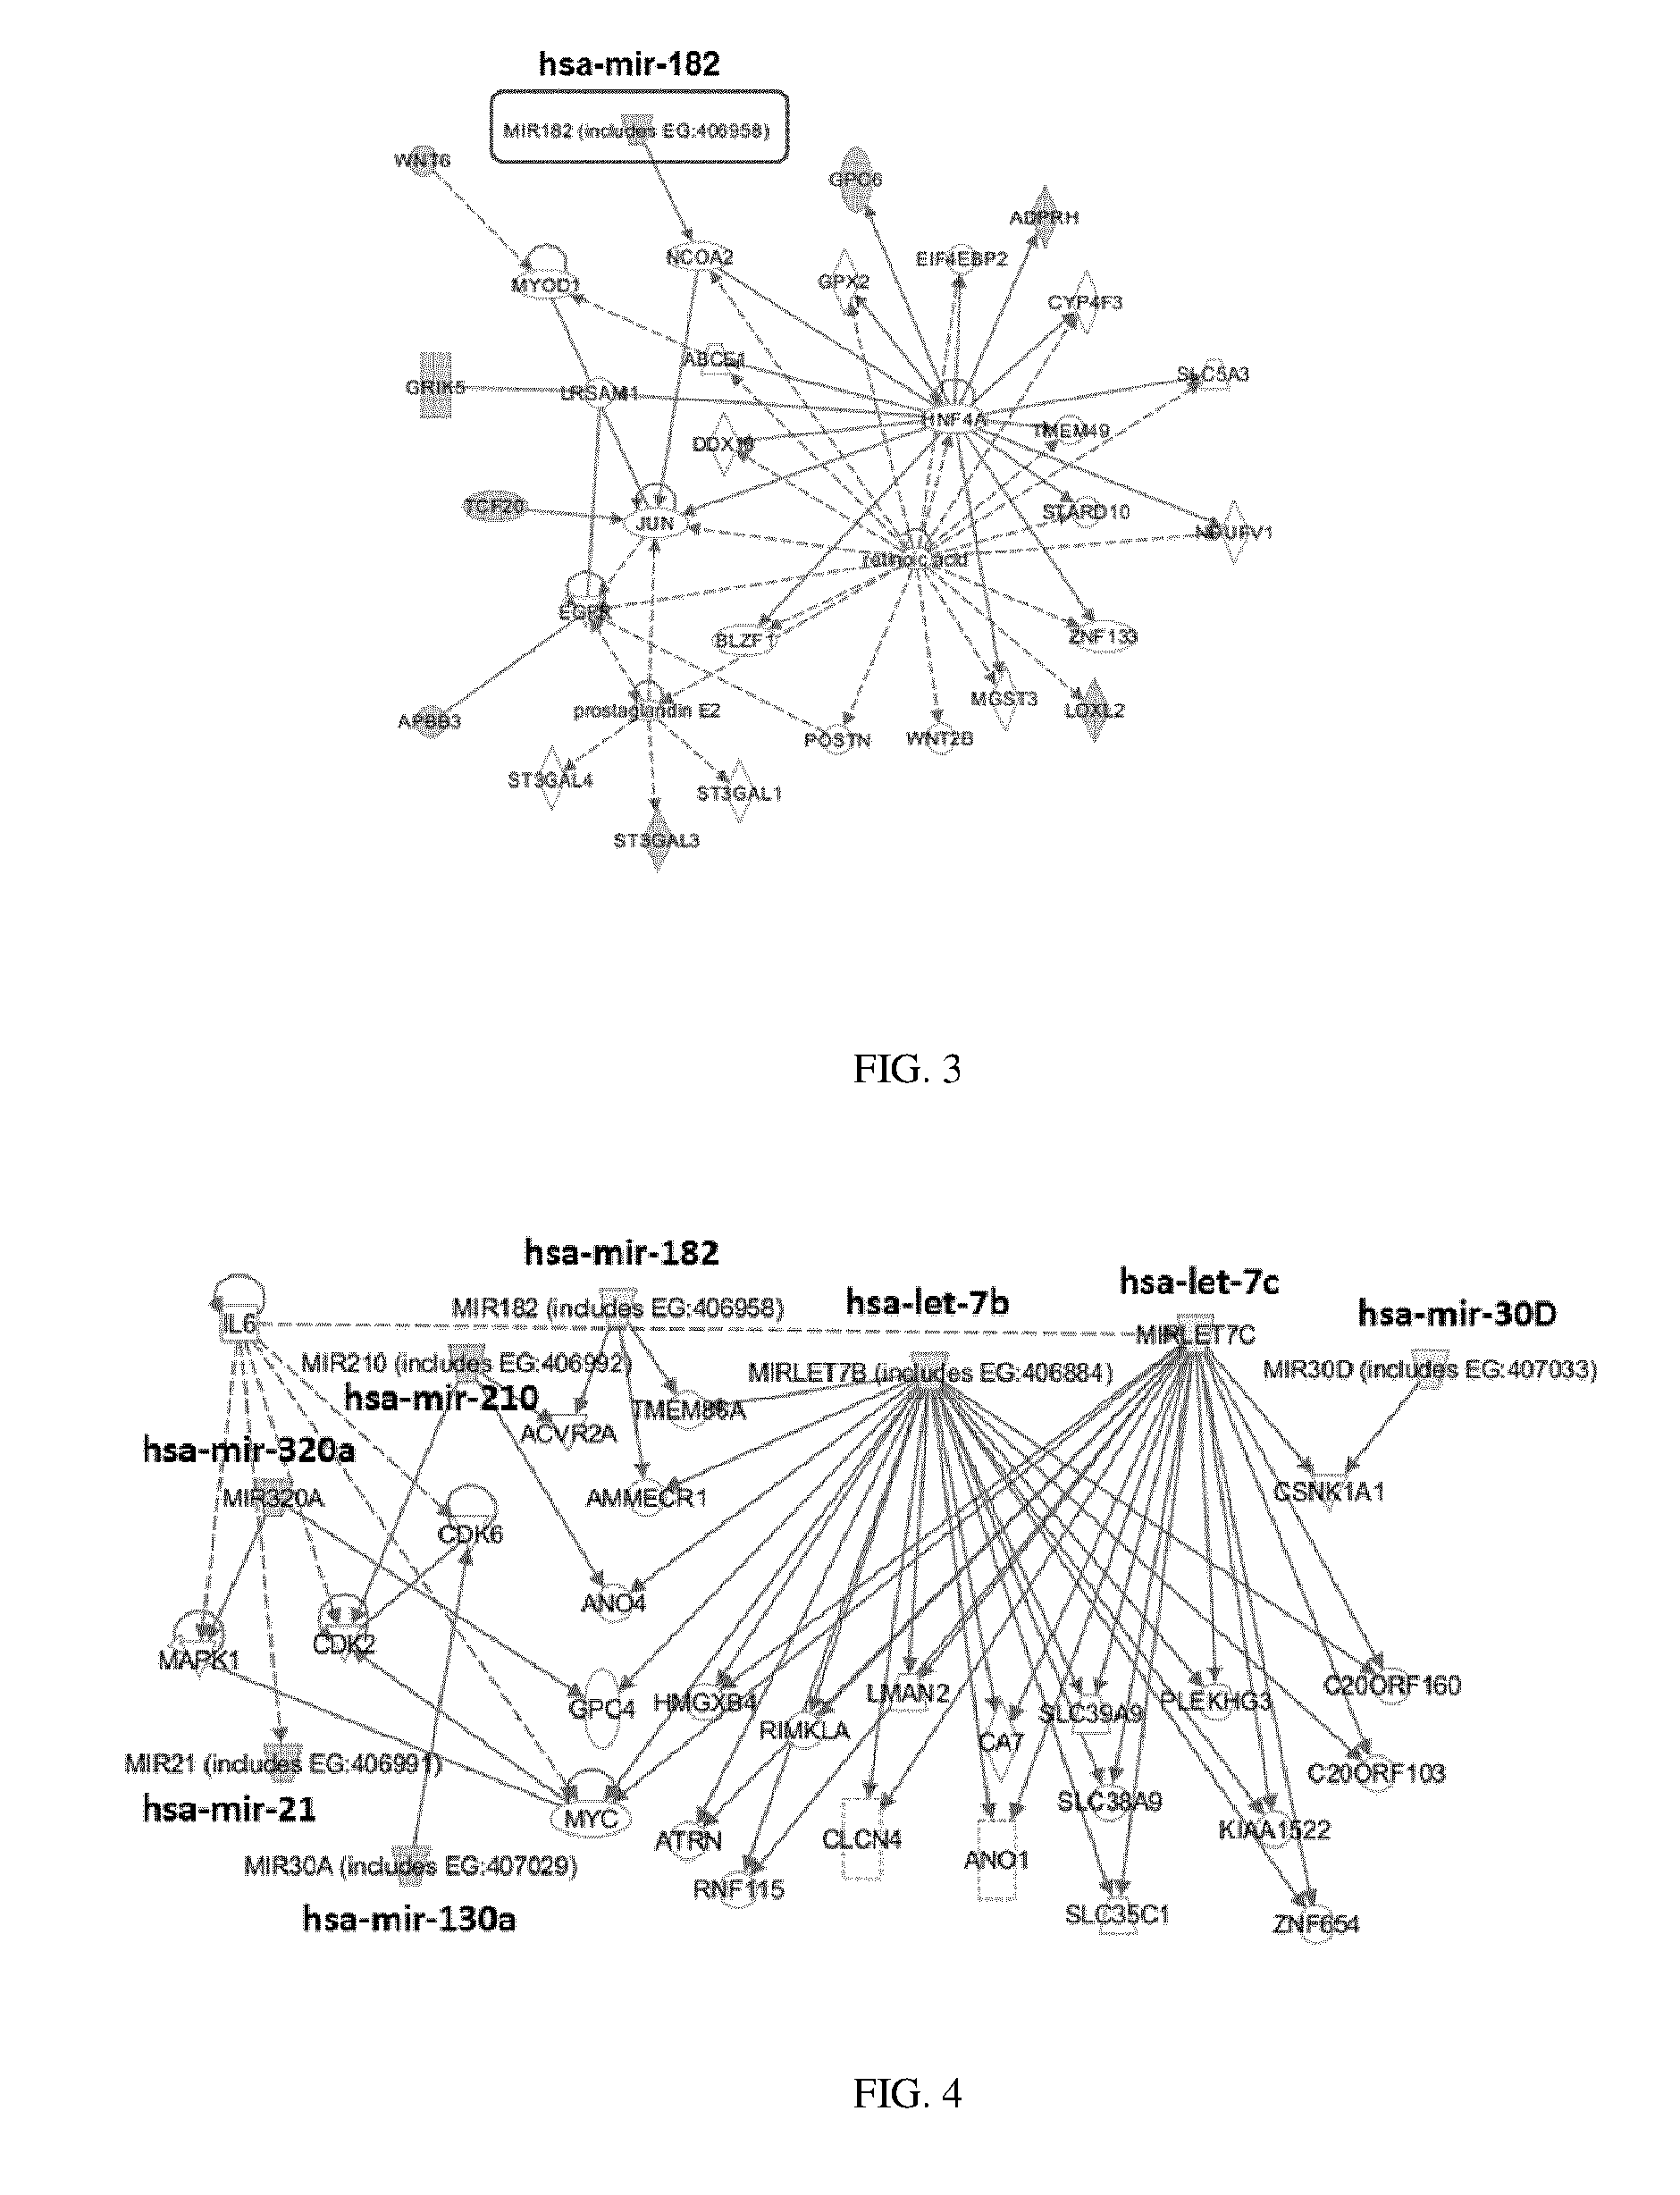 Methods for selecting competent oocytes and competent embryos with high potential for pregnancy outcome